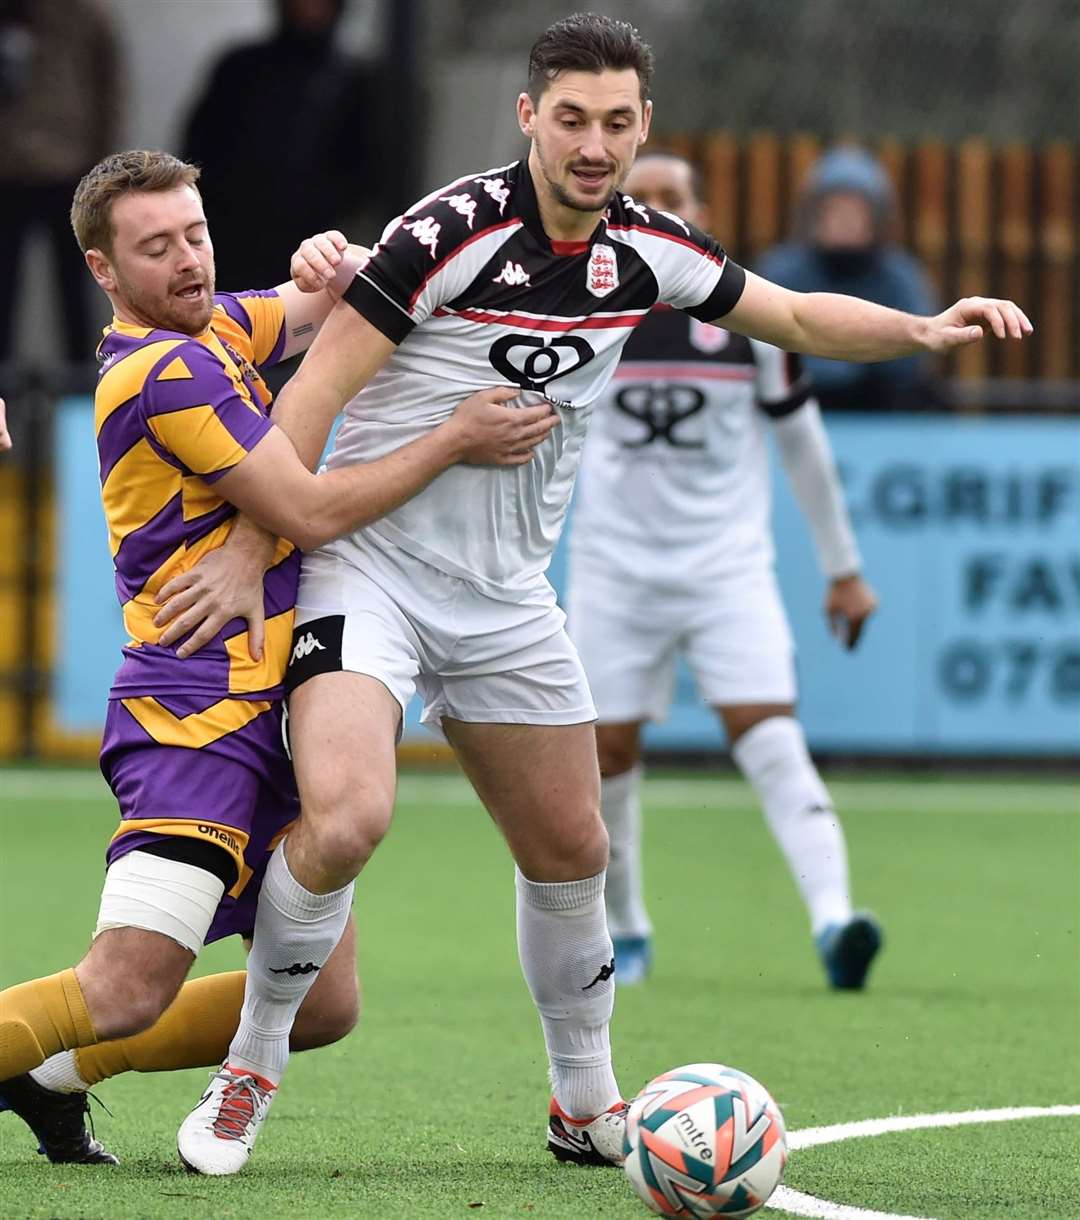 Faversham midfielder Sam Hasler in the thick of the action against Deal's Macauley Murray during the Lilywhites’ 4-2 weekend home defeat. Picture: Ian Scammell